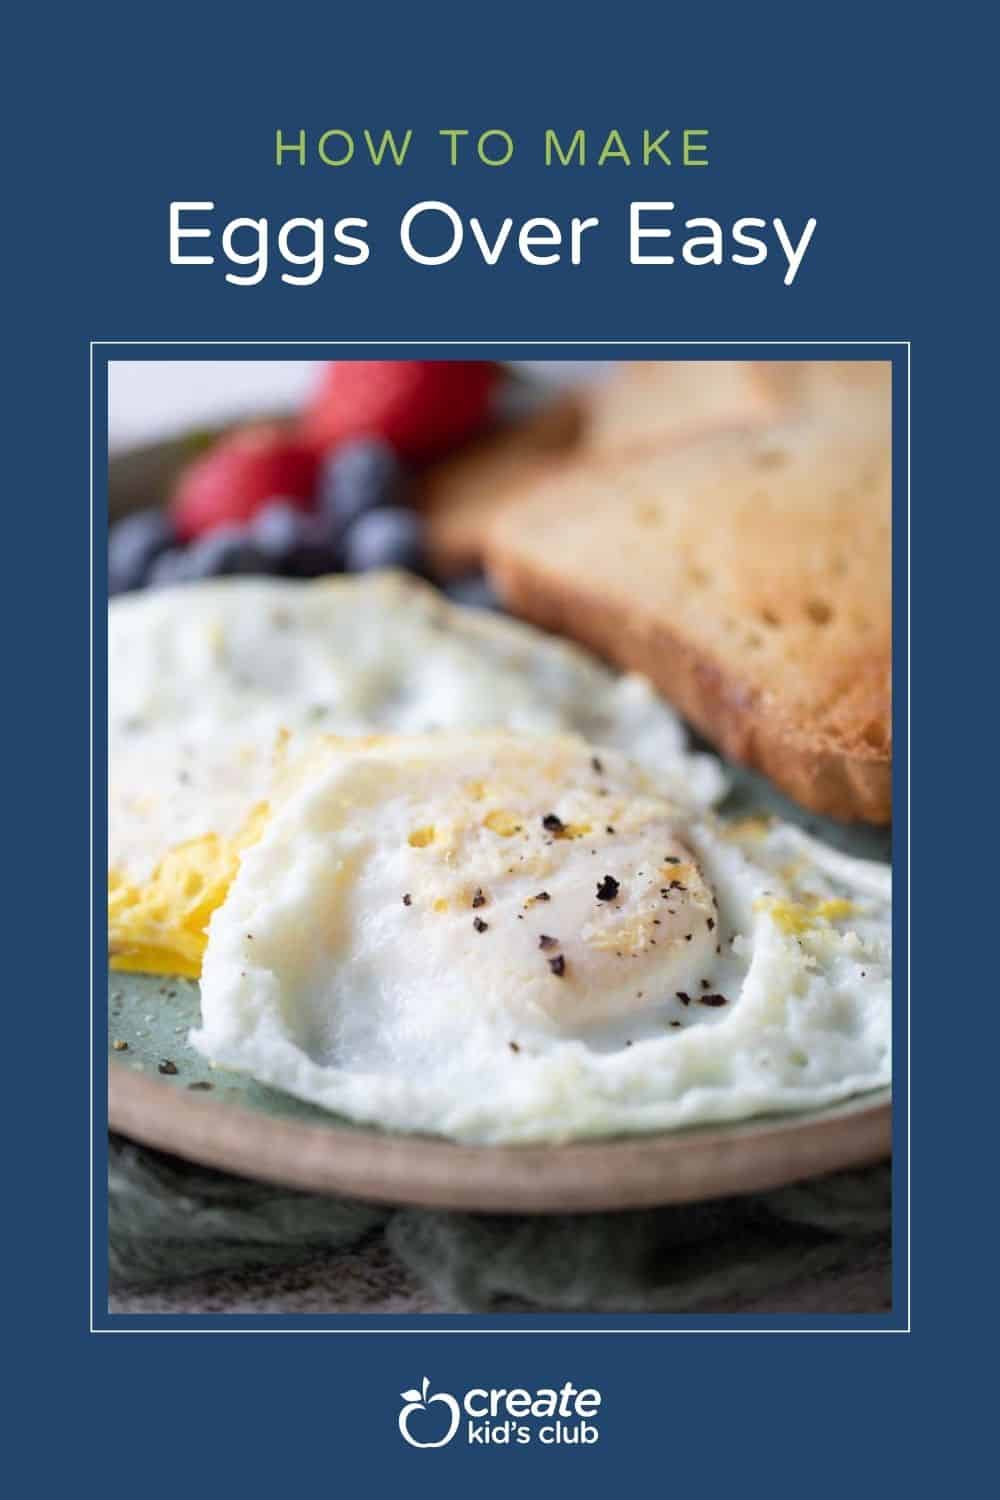 Pin of eggs over easy